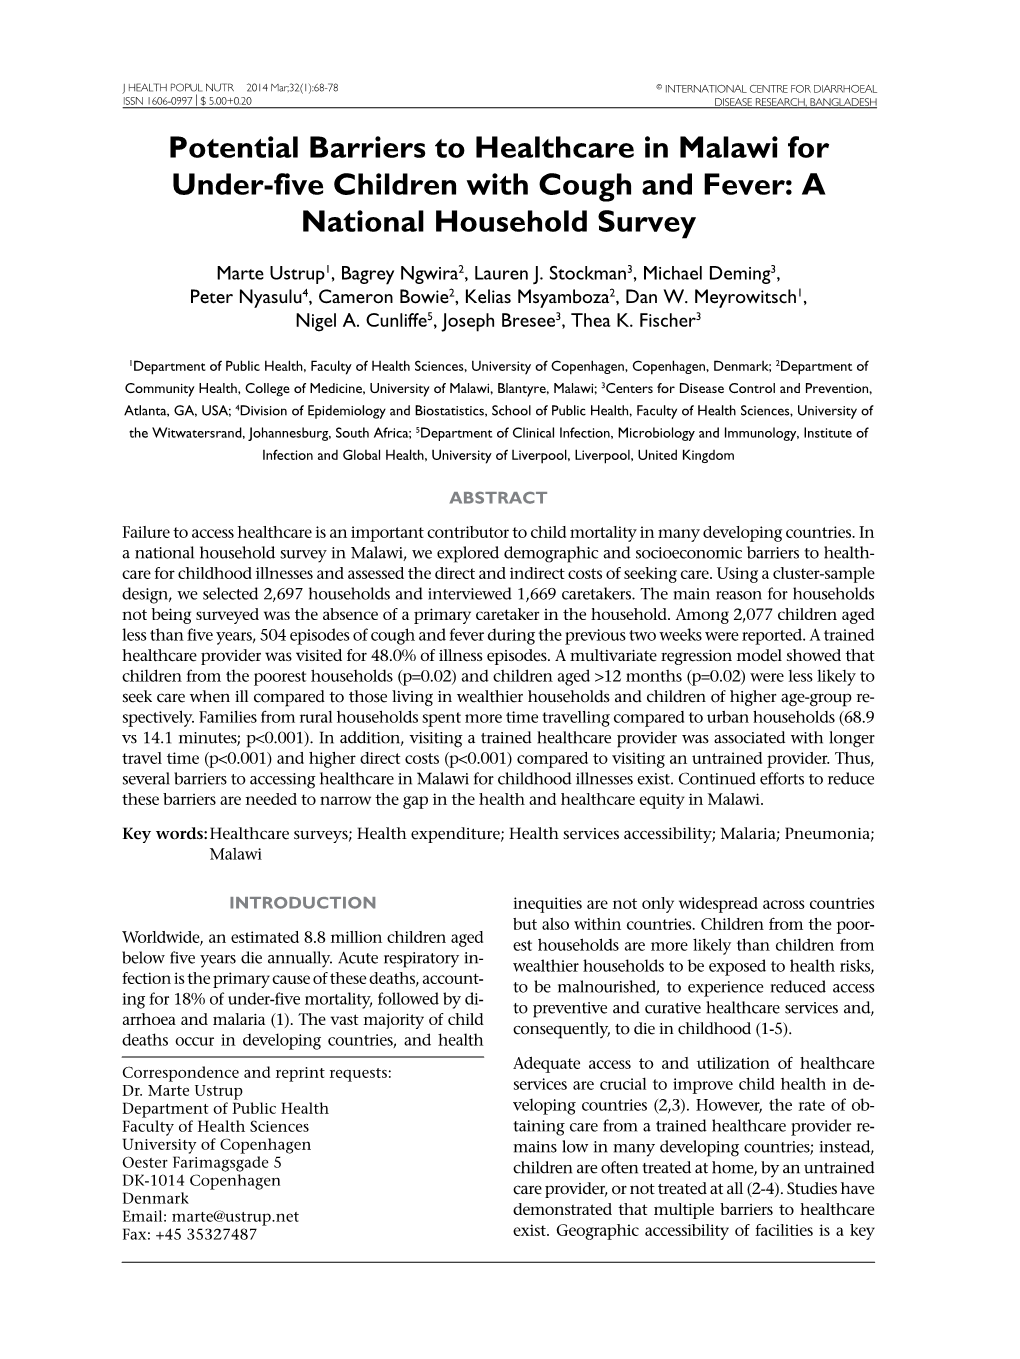 Potential Barriers to Healthcare in Malawi for Under-Five Children with Cough and Fever: a National Household Survey